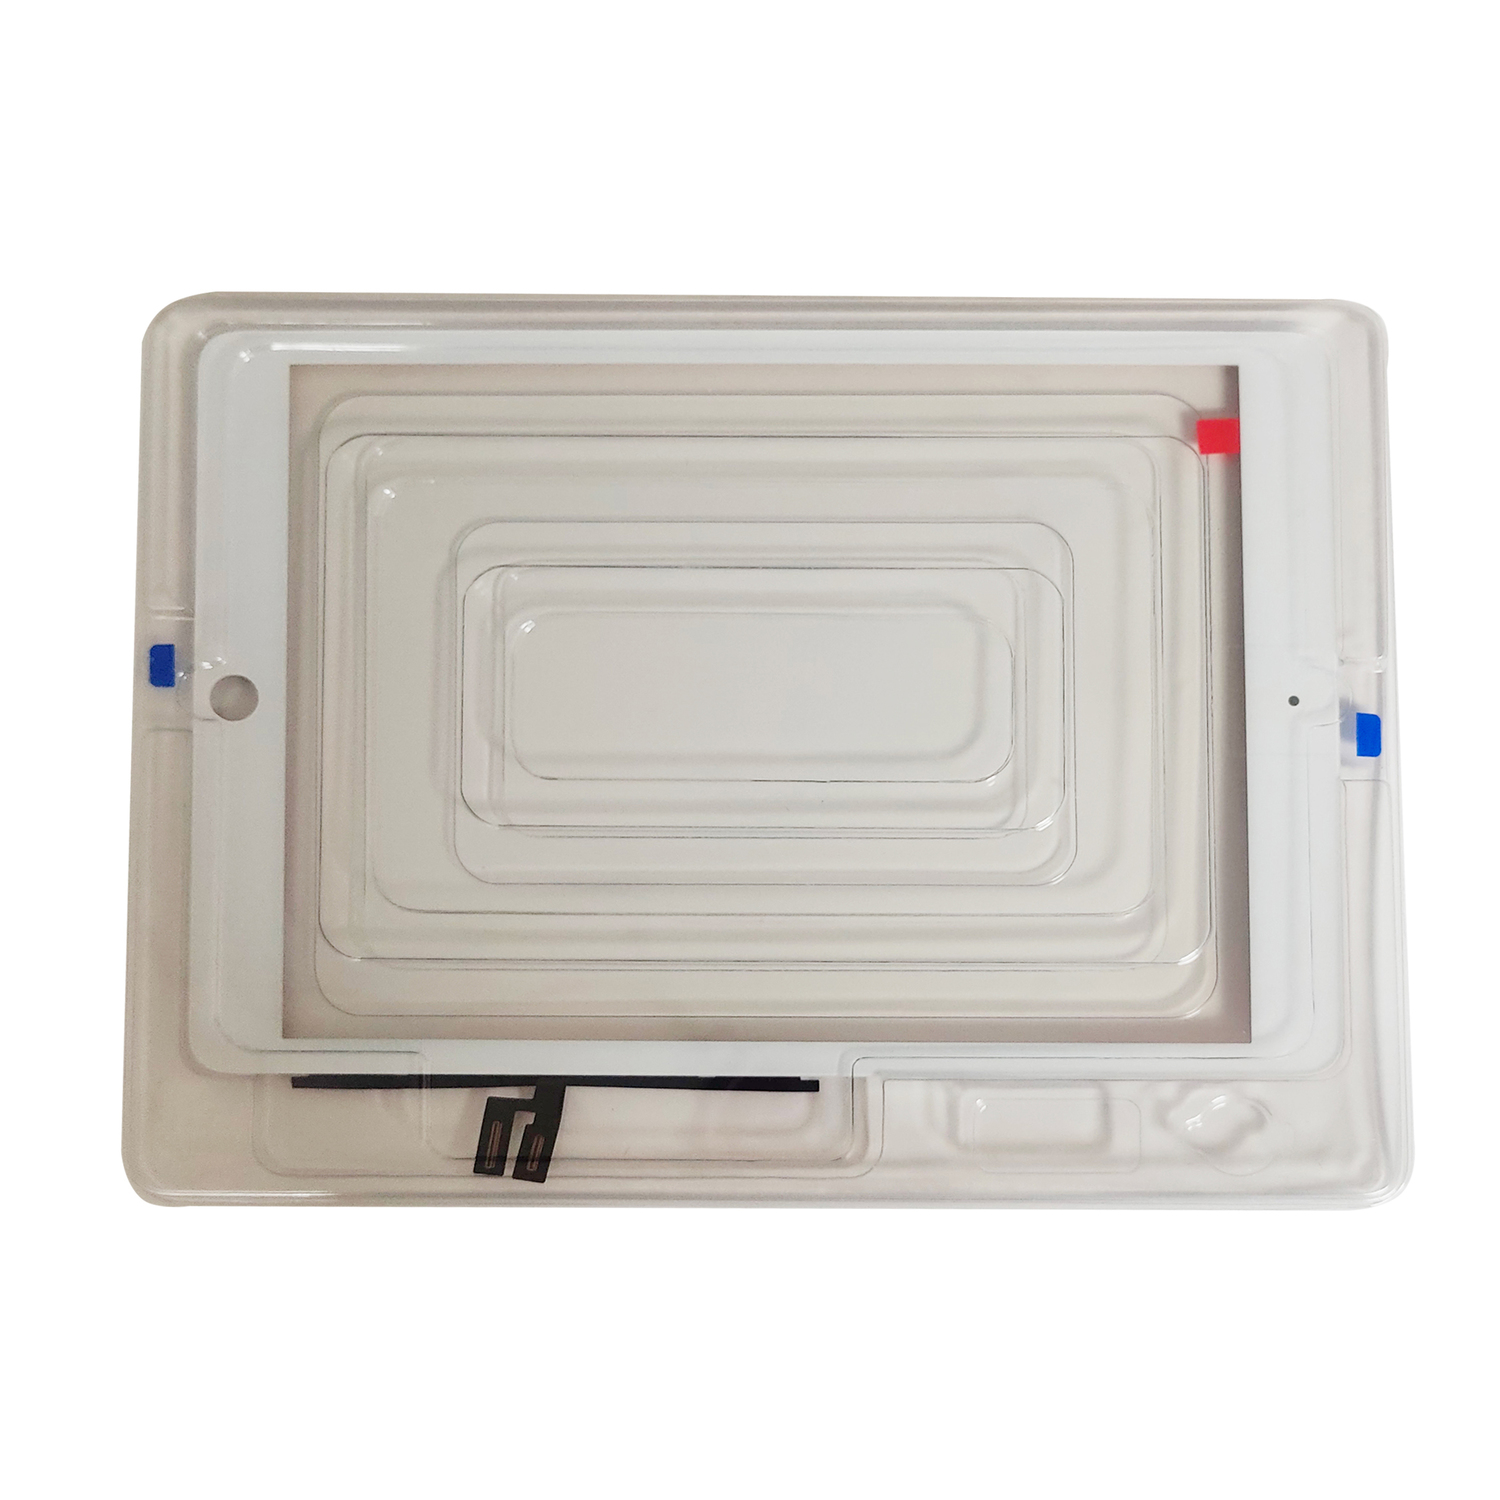 New Arrival iPad 7_8 Digitizer White Replacement